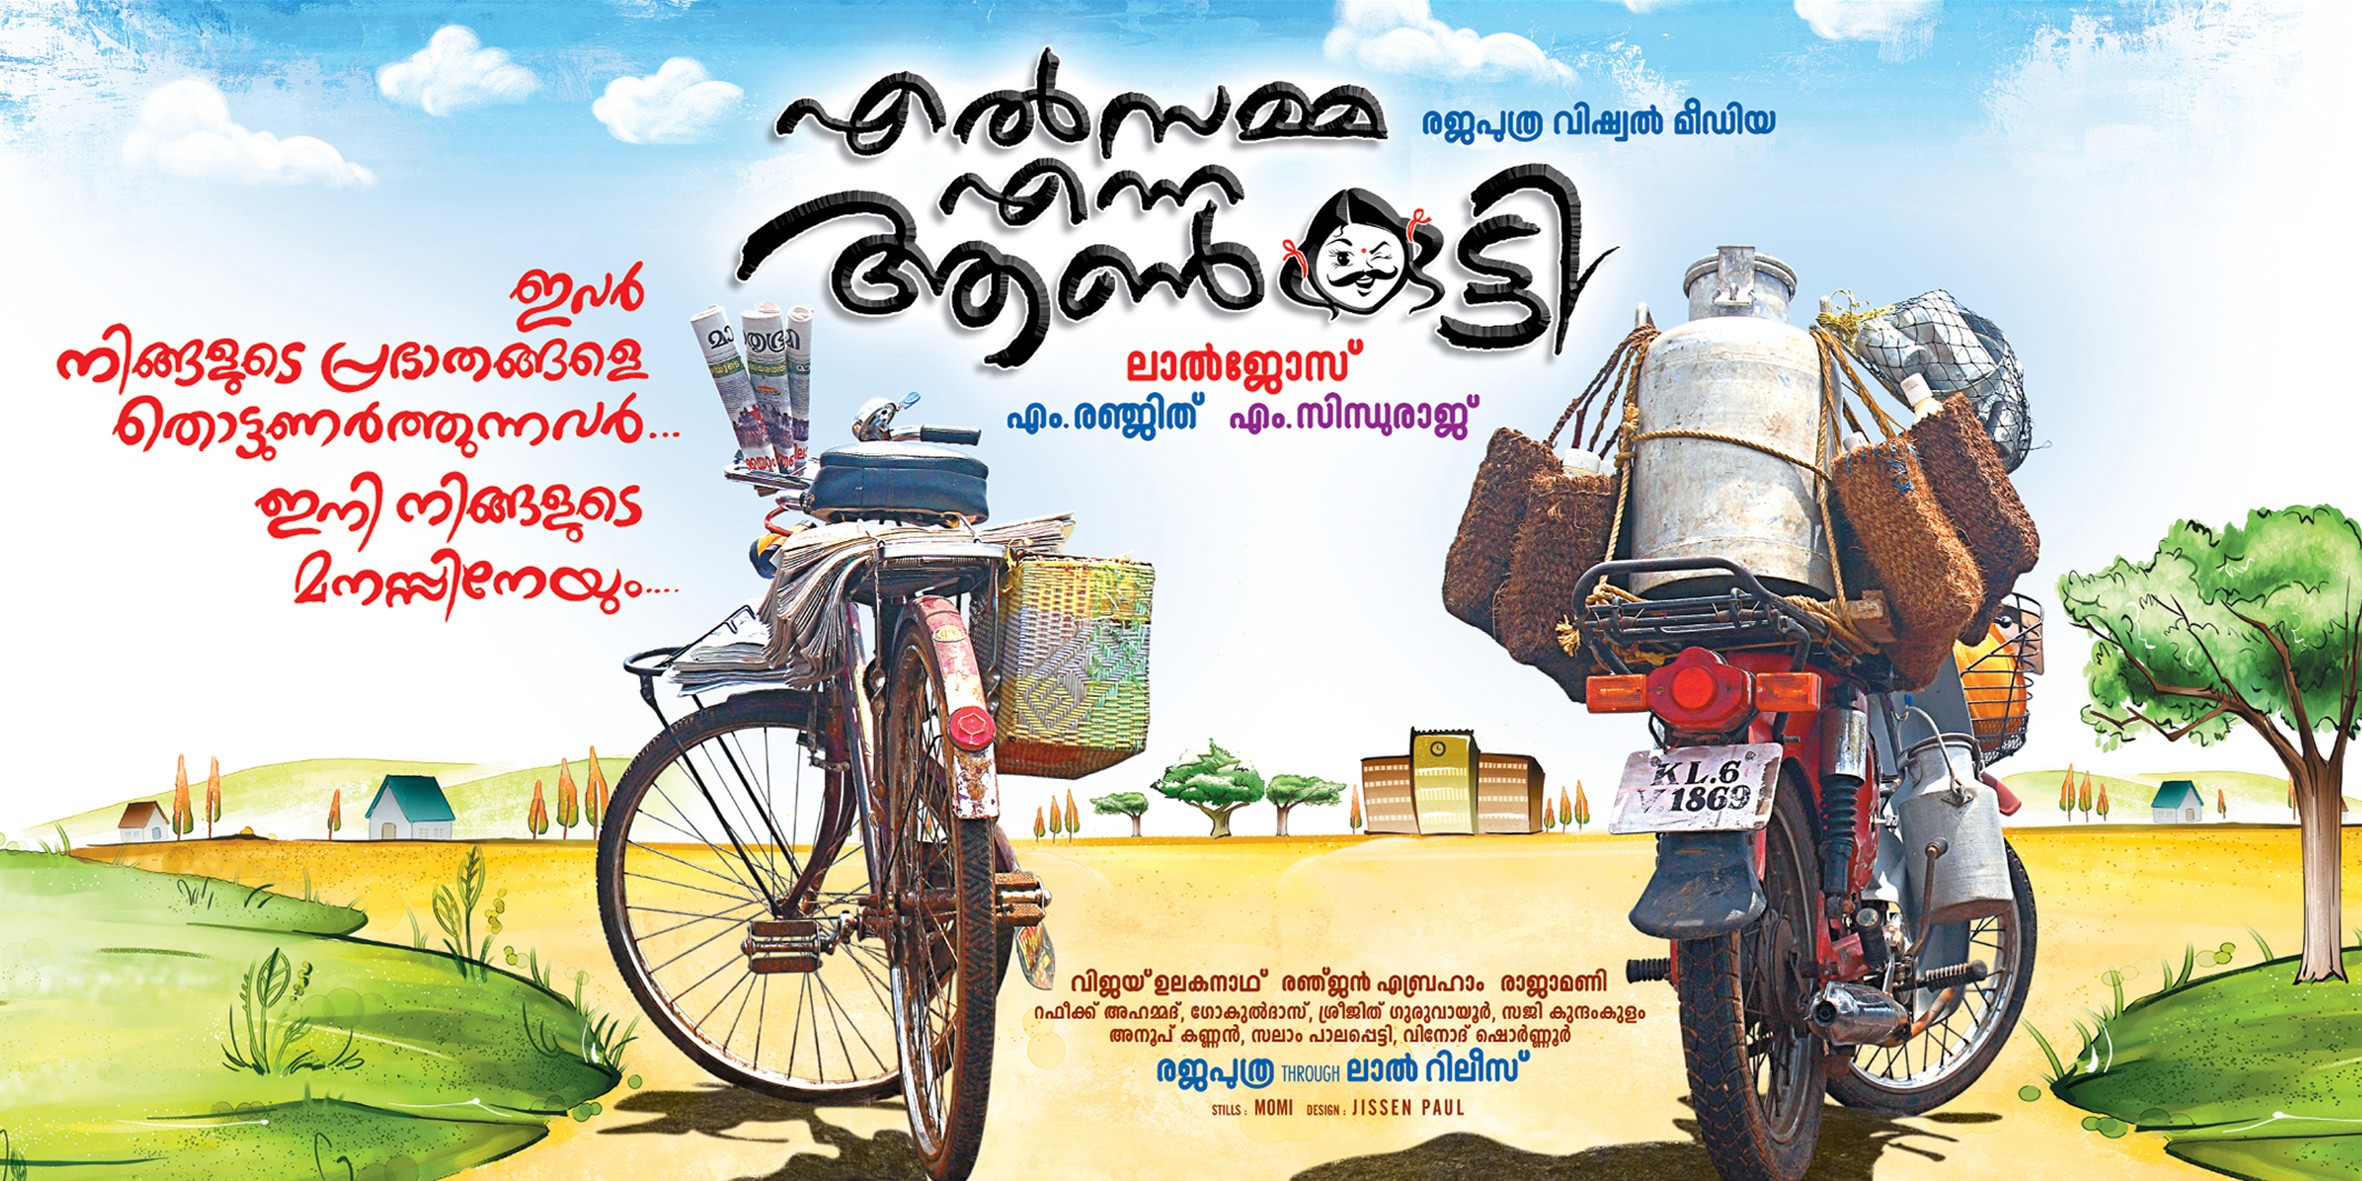 Mega Sized Movie Poster Image for Elsamma Enna Aankutty (#2 of 5)